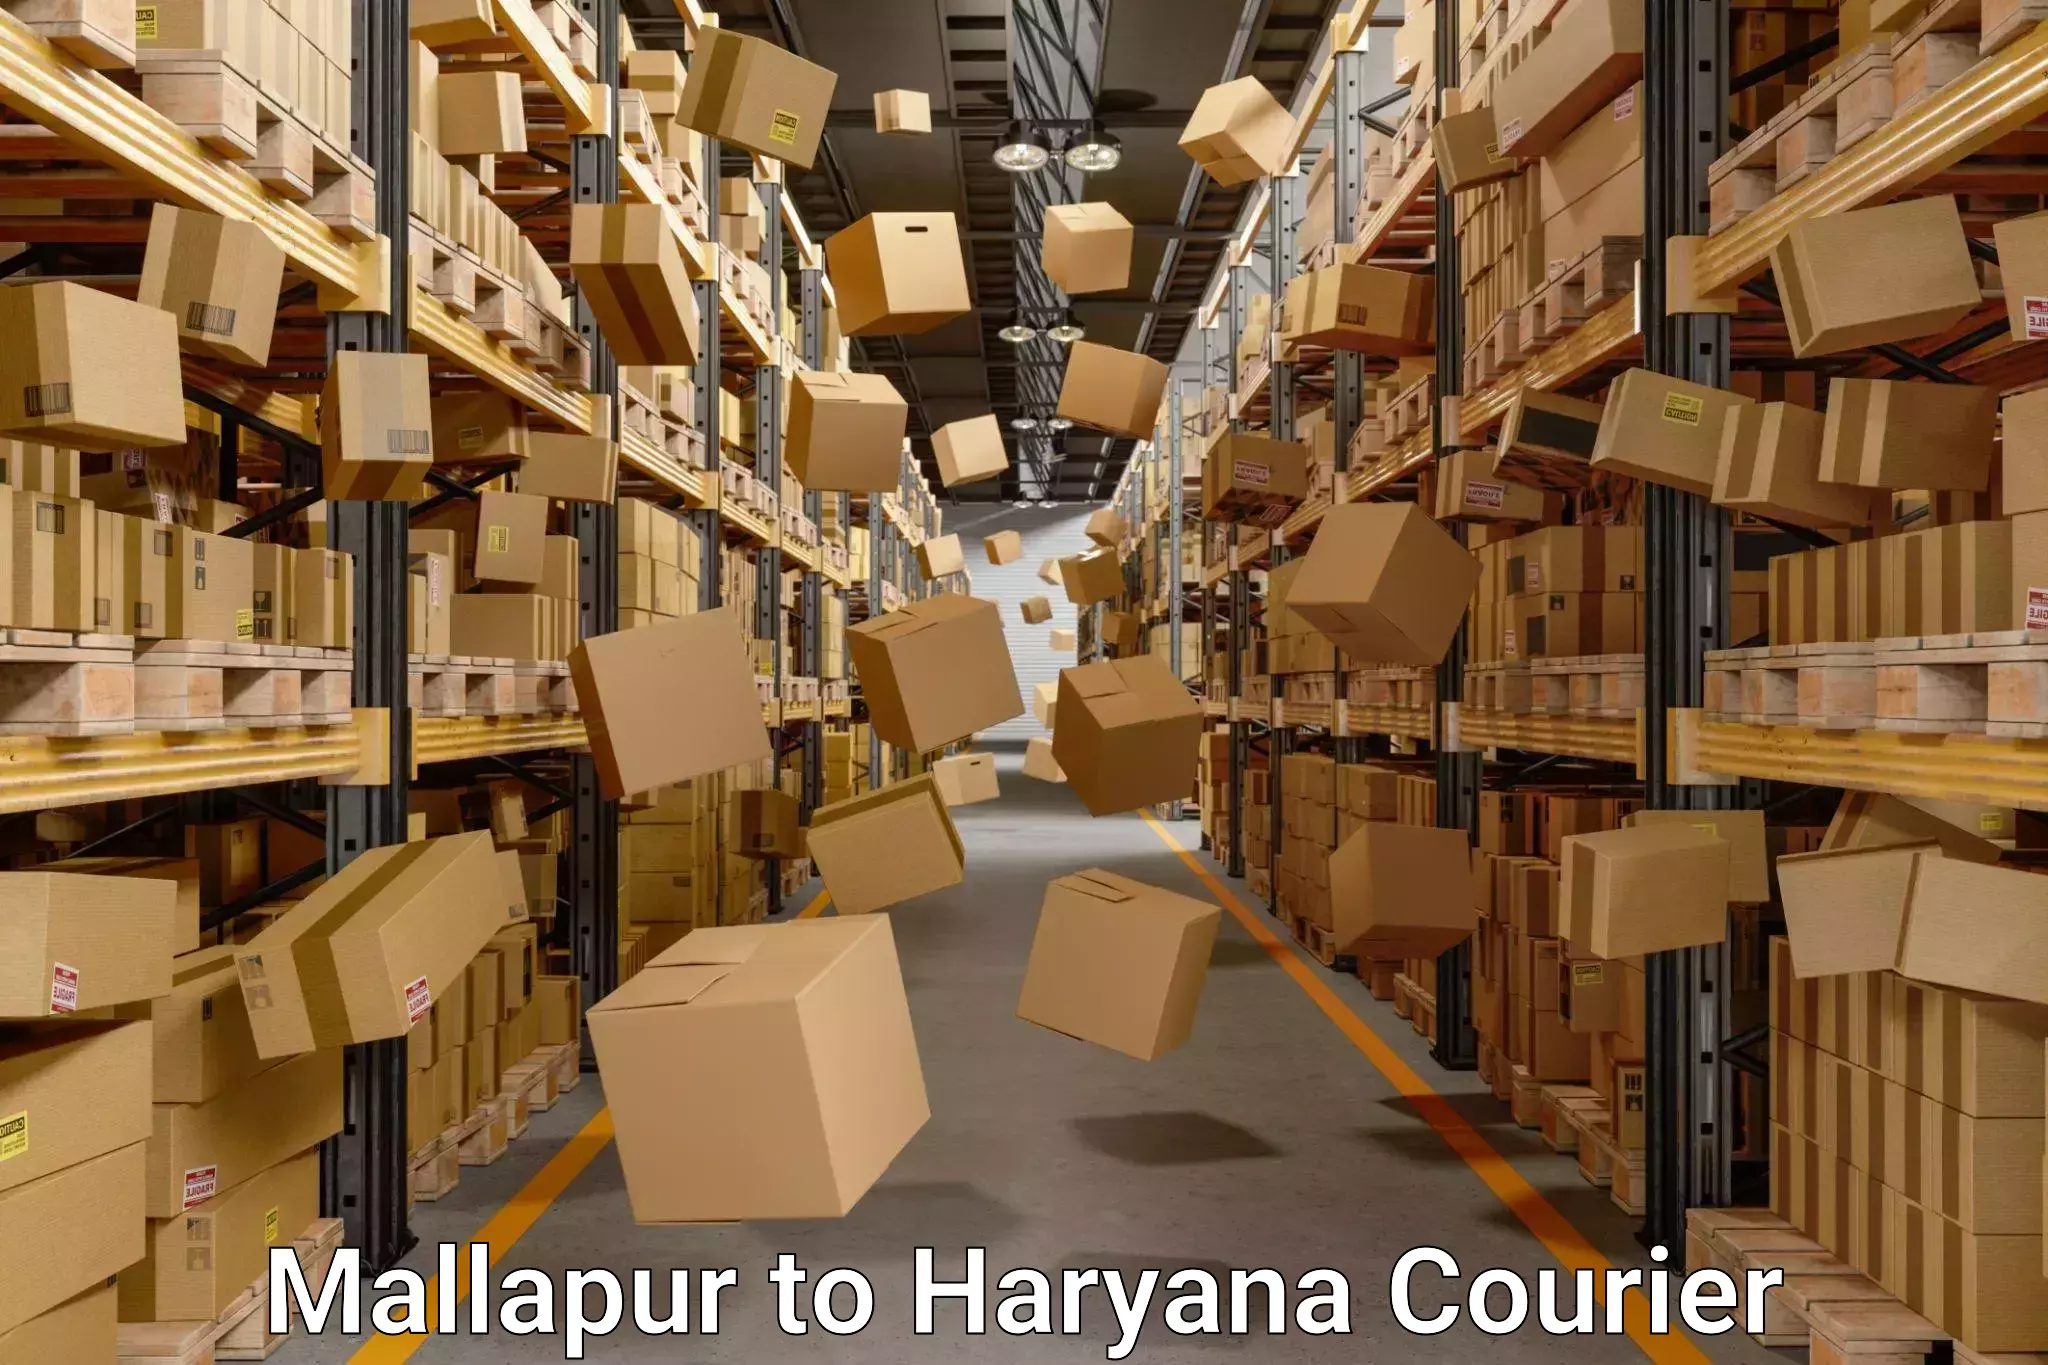 Moving and storage services in Mallapur to Haryana